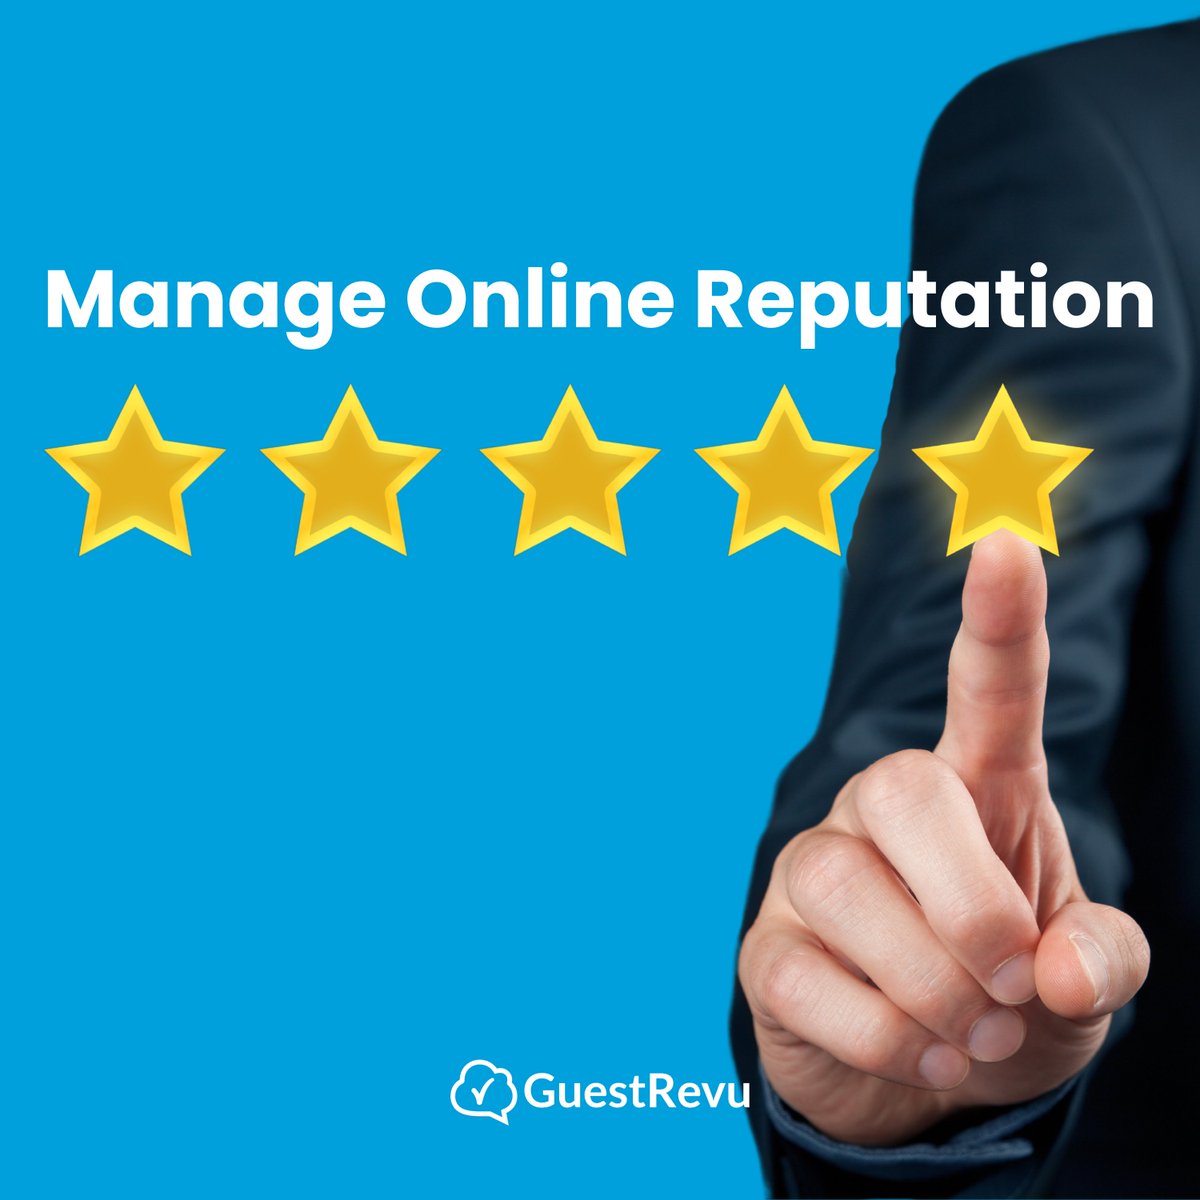 With #GuestRevu, companies can proactively shape customer experiences by analysing data and fine-tuning areas that need improvement 📈

hubs.ly/Q02tl5zb0 🔗
#GuestReputation #FeedbackMatters #GuestRevu #ReputationManagement #GameLodge